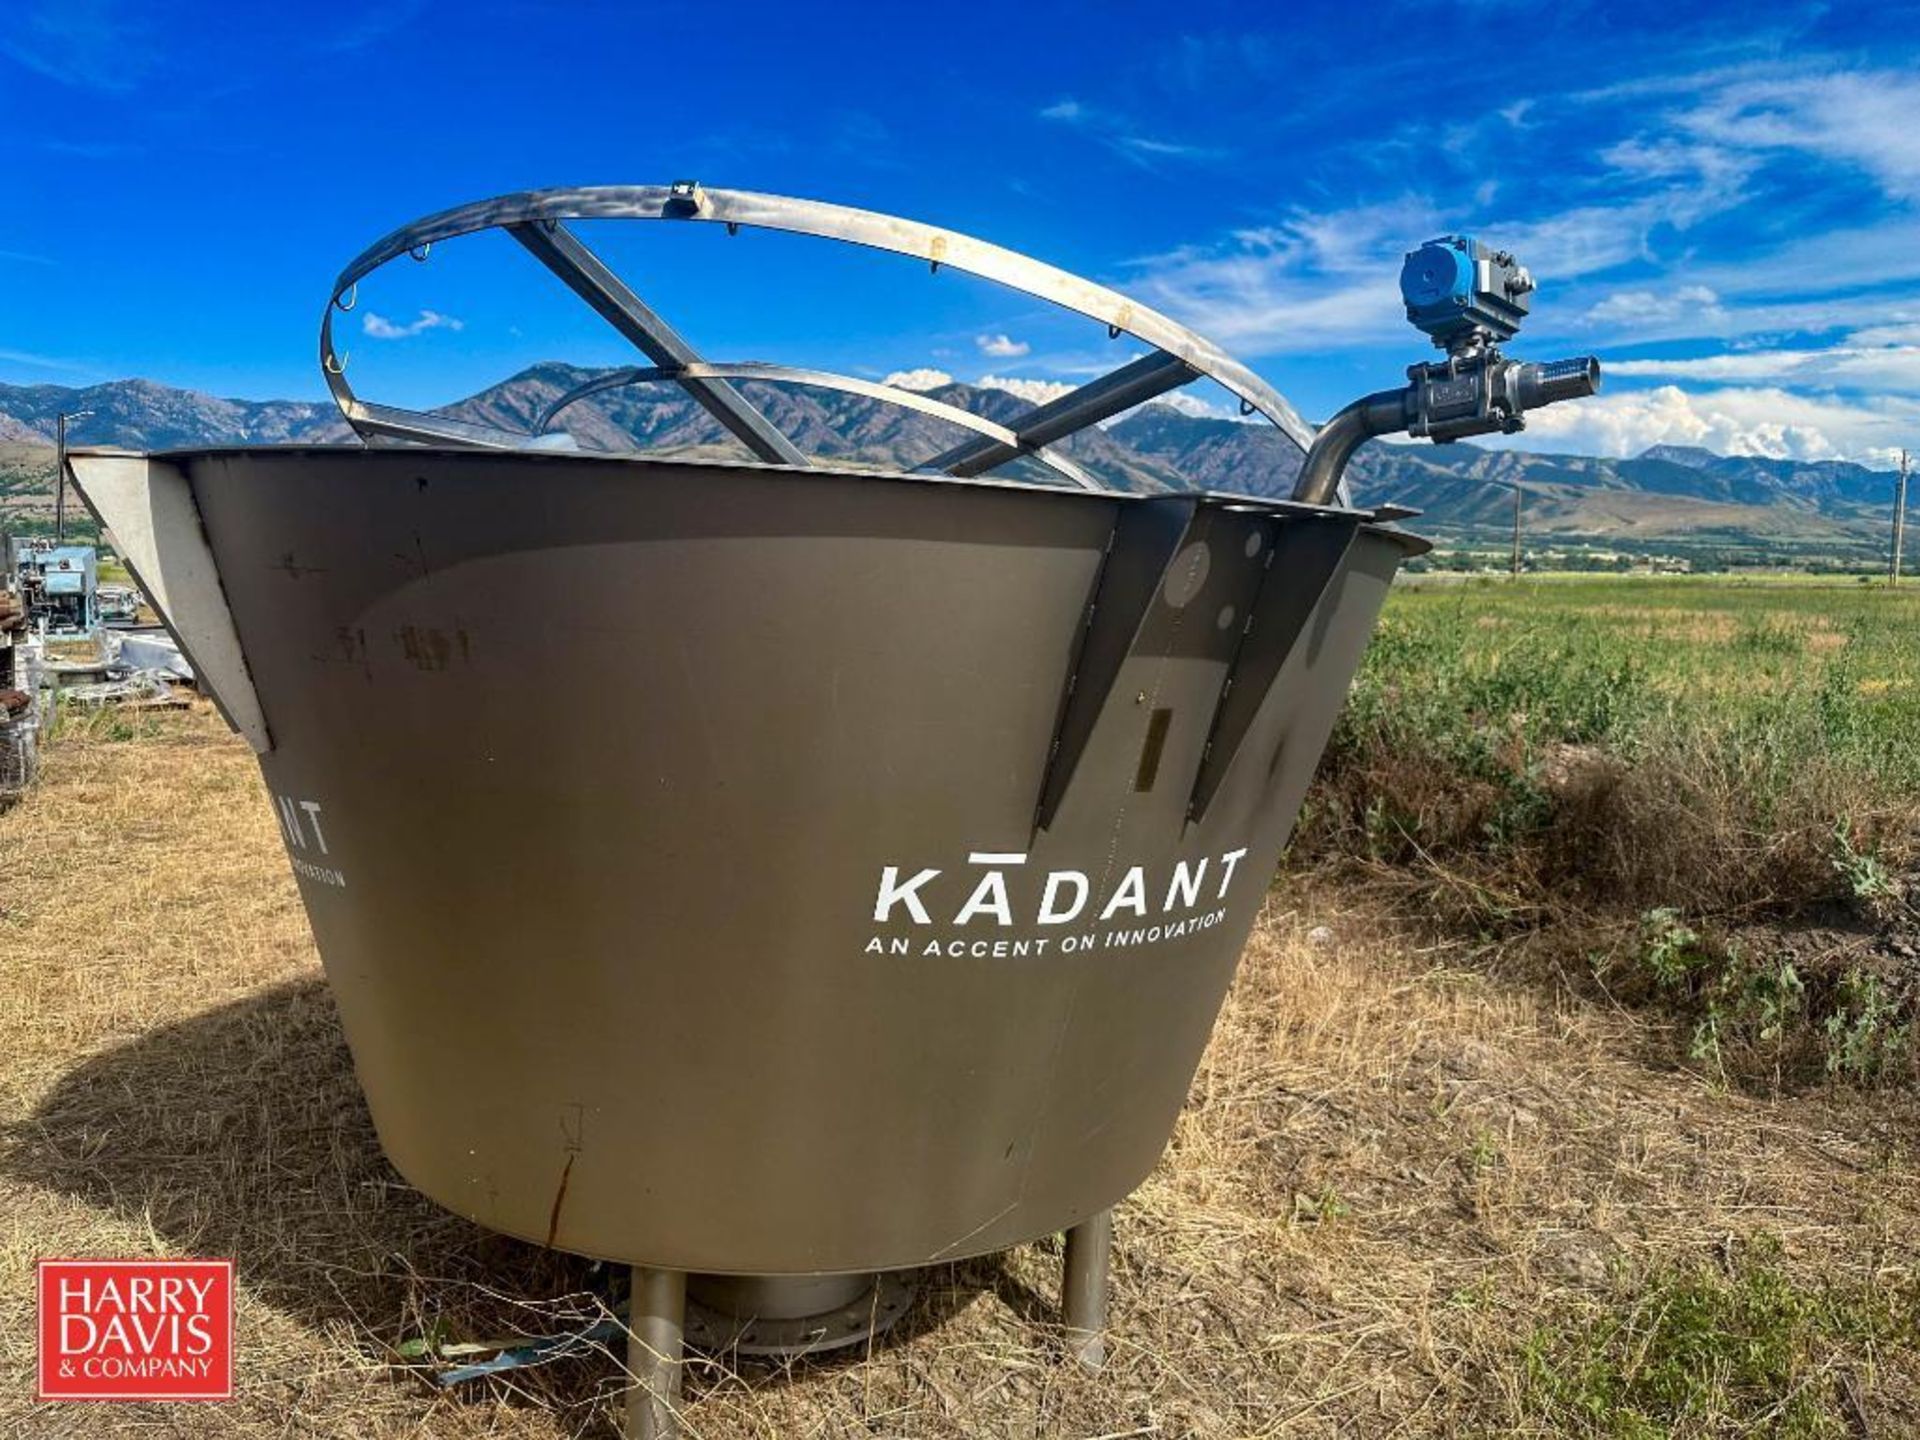 Kadant RotoFlex Resource Recovery Strainer - Rigging Fee: $350 - Image 2 of 7